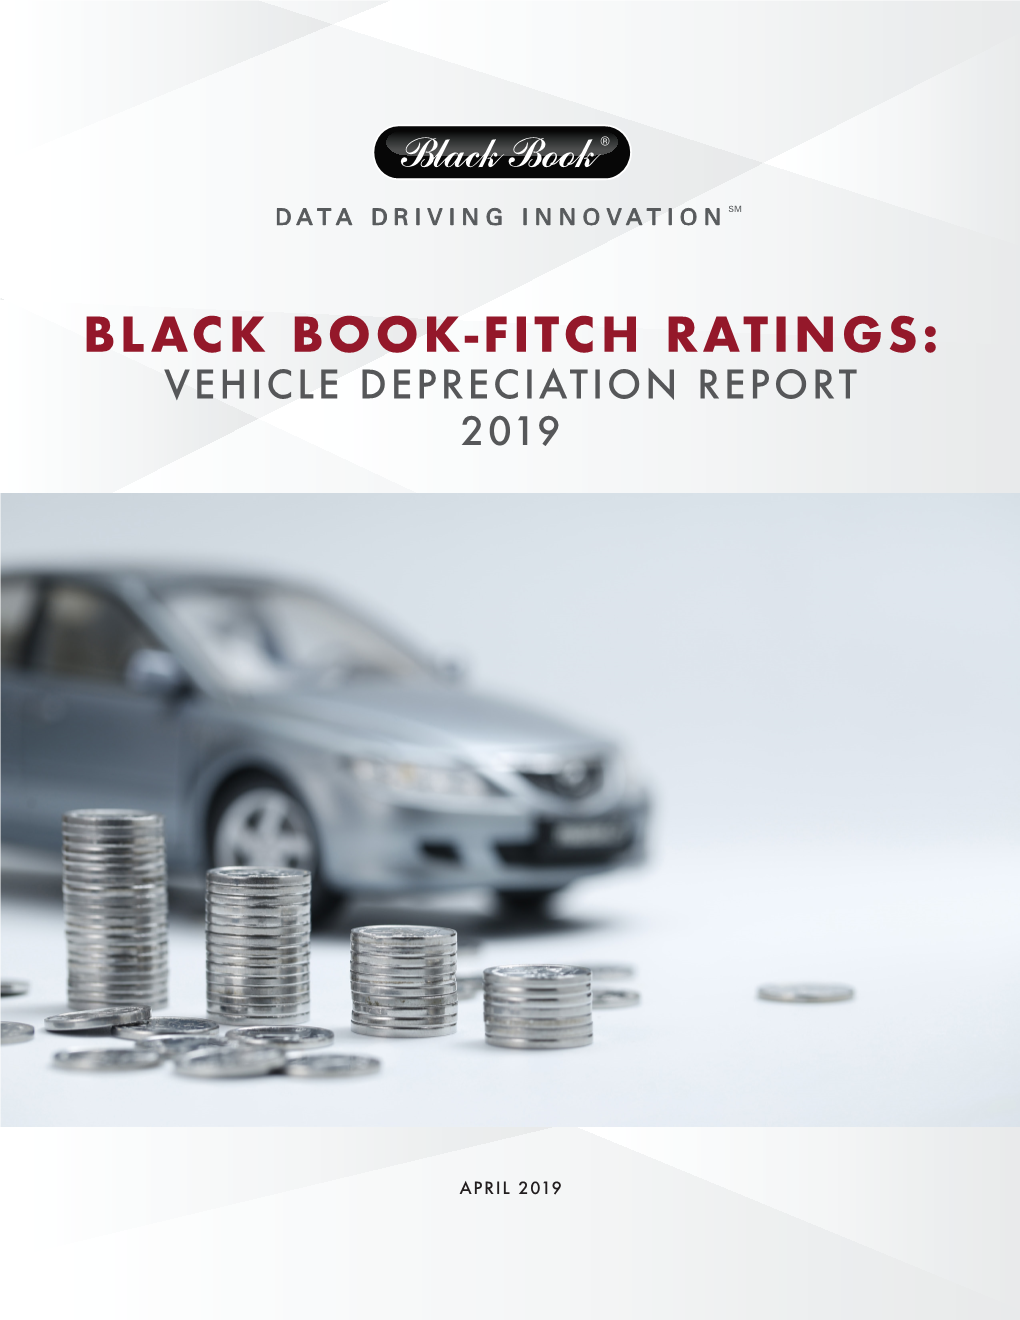 Black Book-Fitch Ratings: Vehicle Depreciation Report 2019